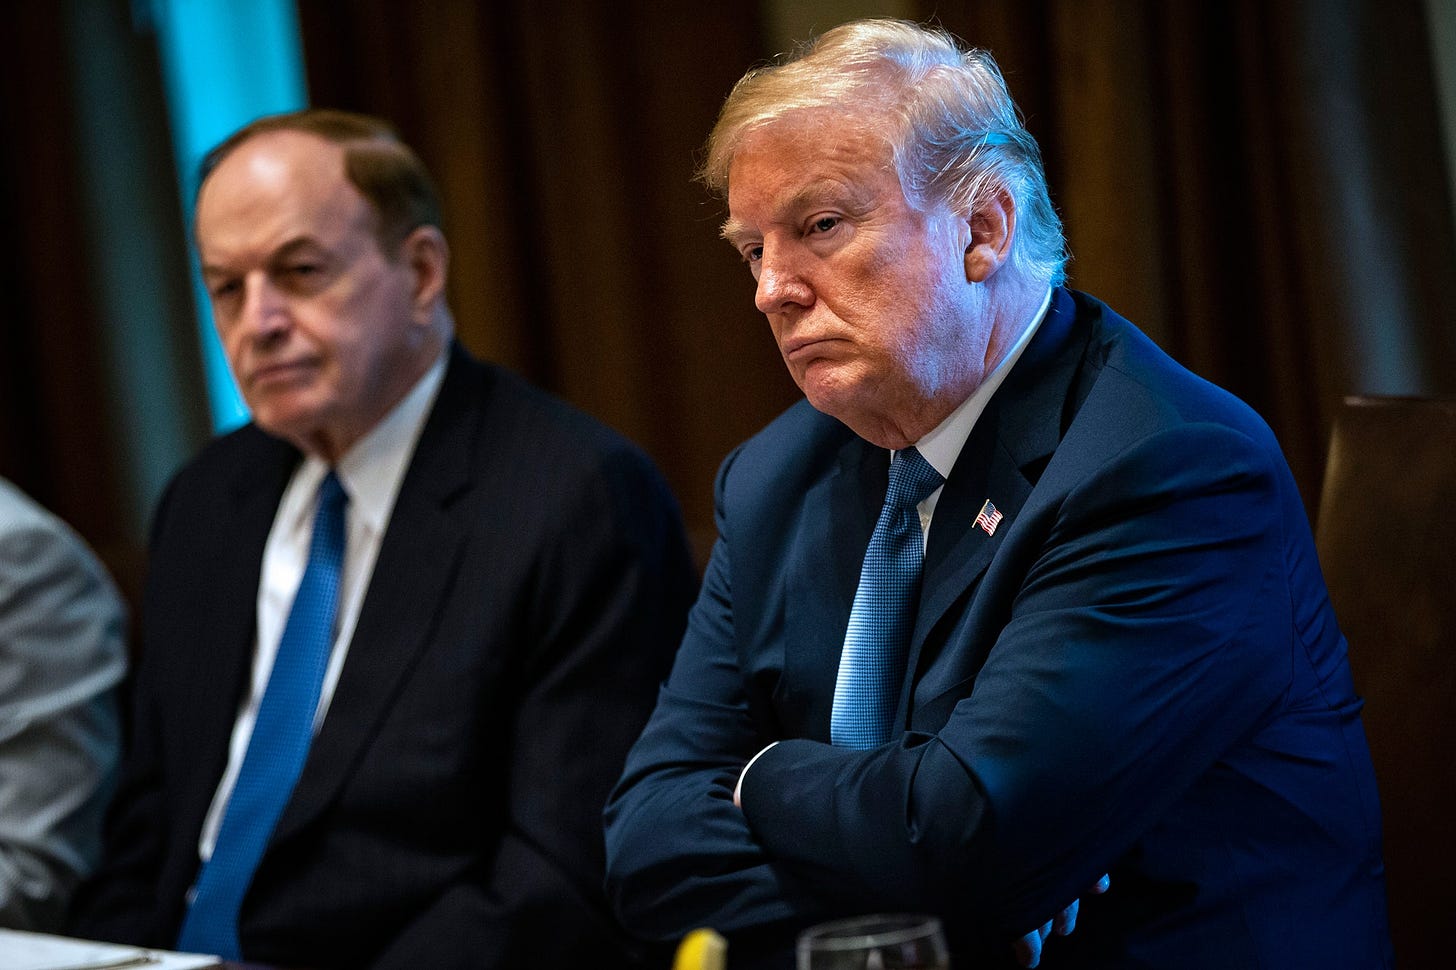 Senator Richard Shelby and Donald Trump in the Cabinet Room at the White House.